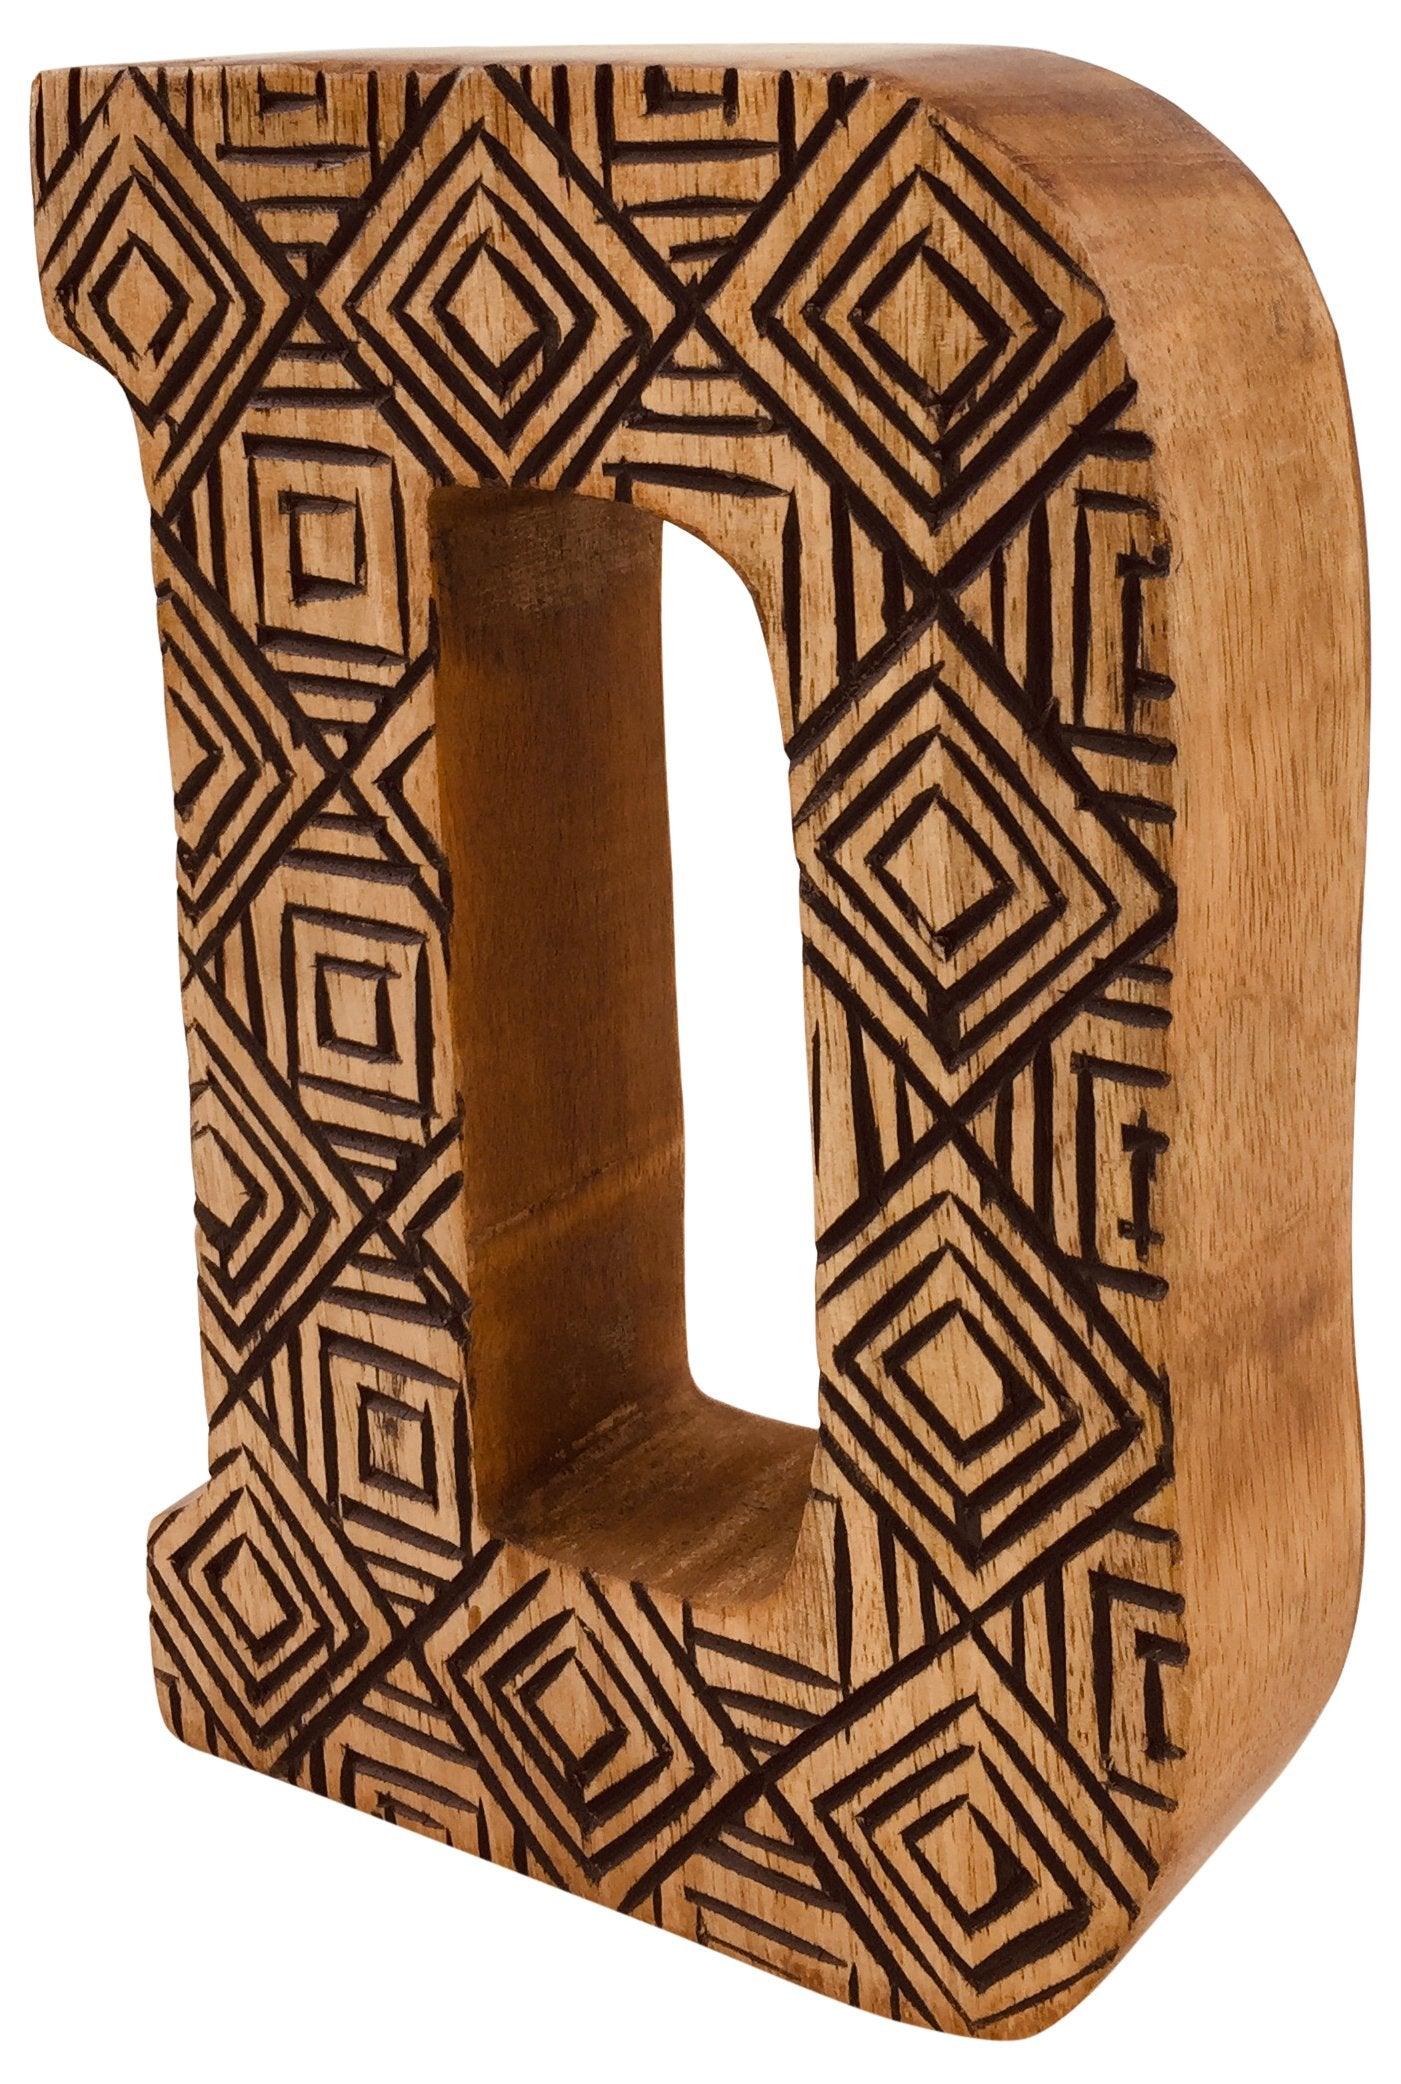 View Hand Carved Wooden Geometric Letter D information